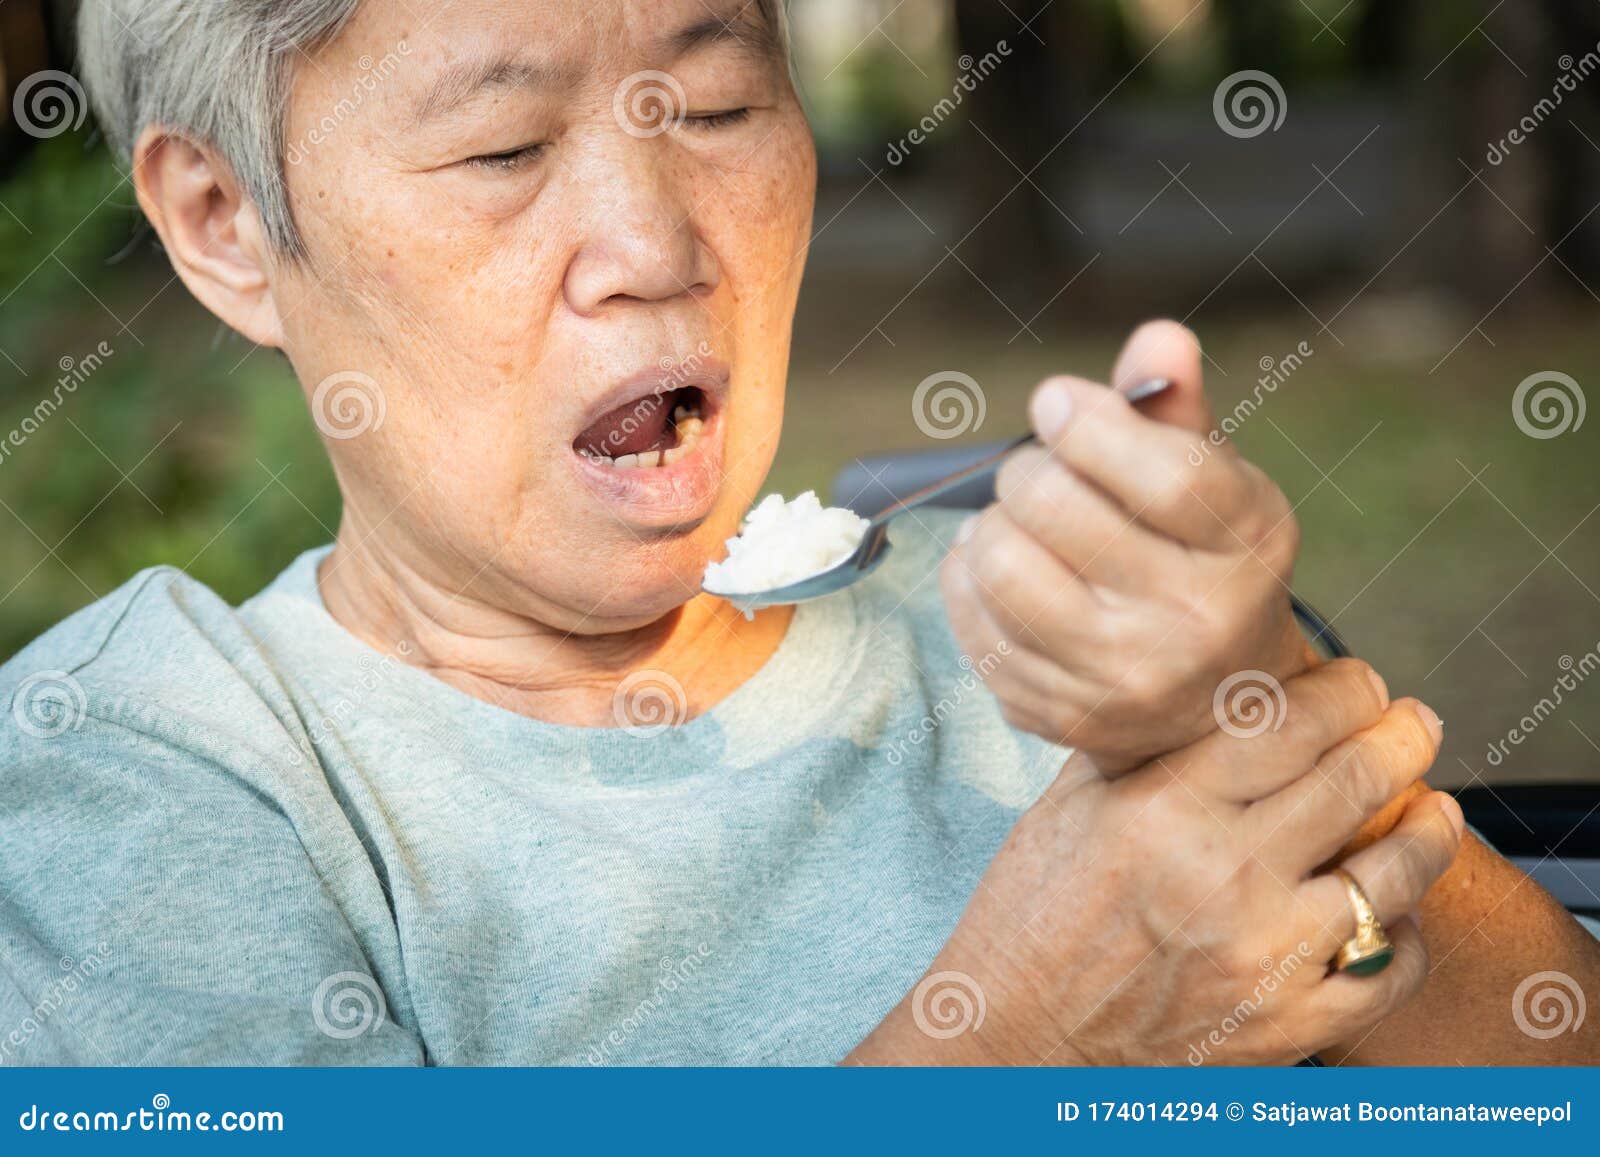 asian senior woman holding spoon and hands tremor while eating rice,cause of hands shaking include parkinson`s disease,stroke,